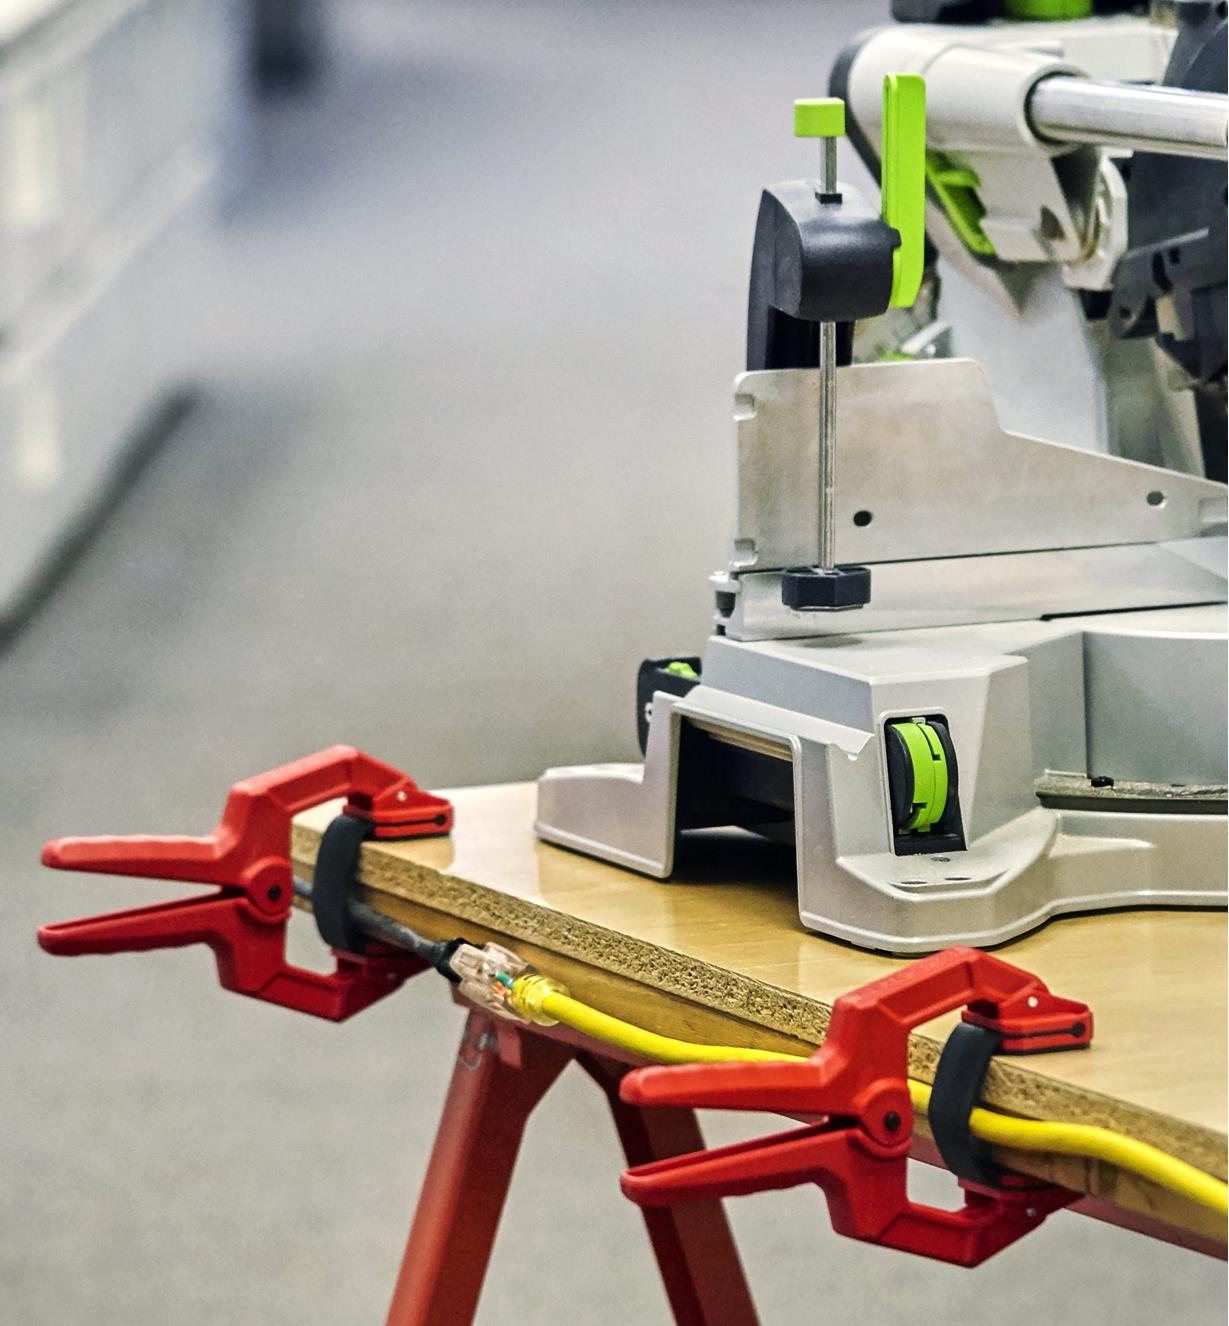 Two edging clamps being used to keep a power cord in place along the edge of a miter-saw stand